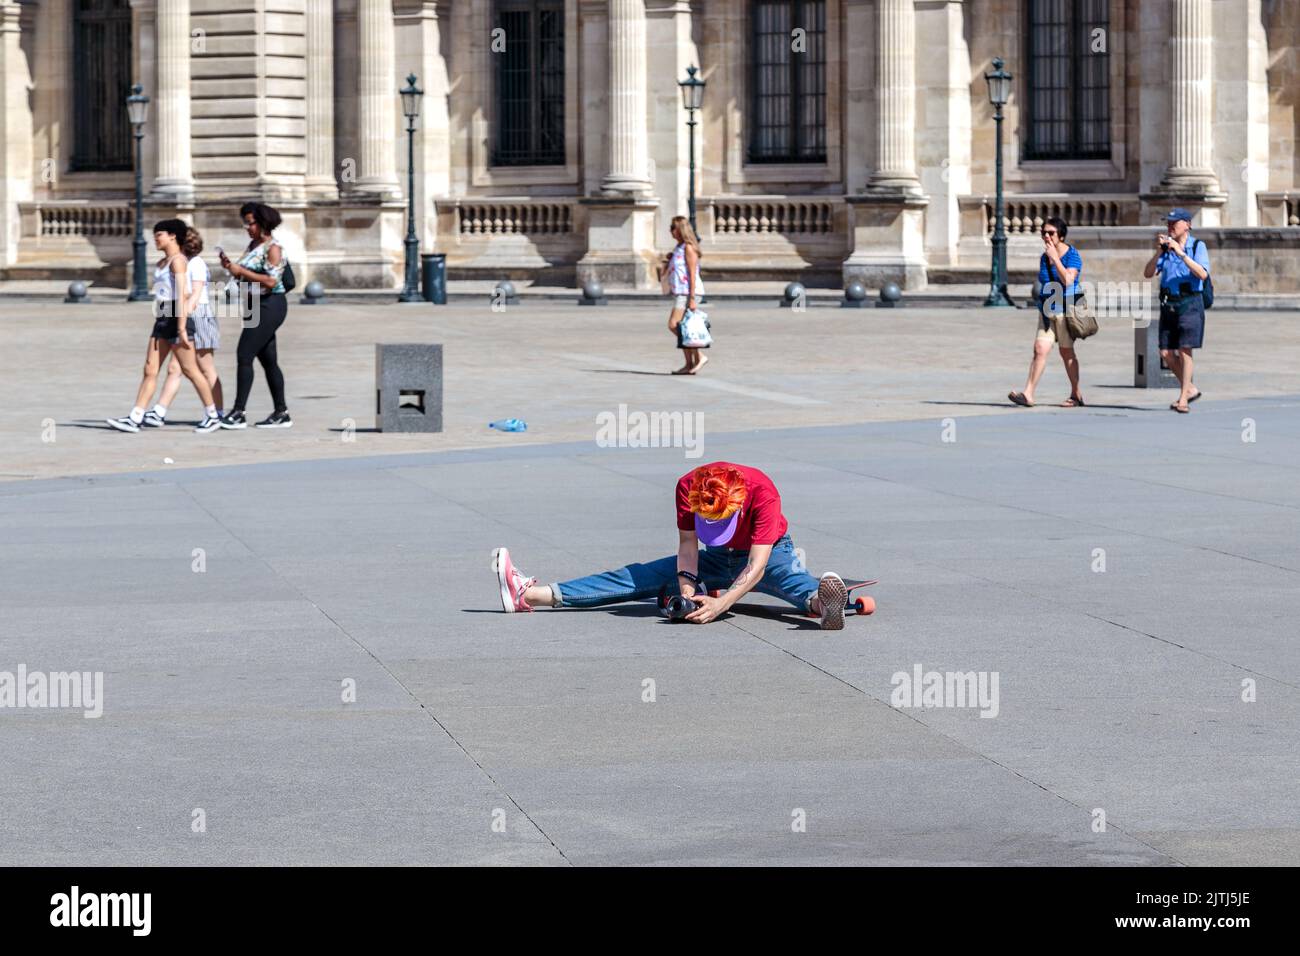 PARIS, FRANCE - AUGUST 30, 2019: An unidentified photographer is doing a stretch in the middle of the square in search of an unusual angle. Stock Photo